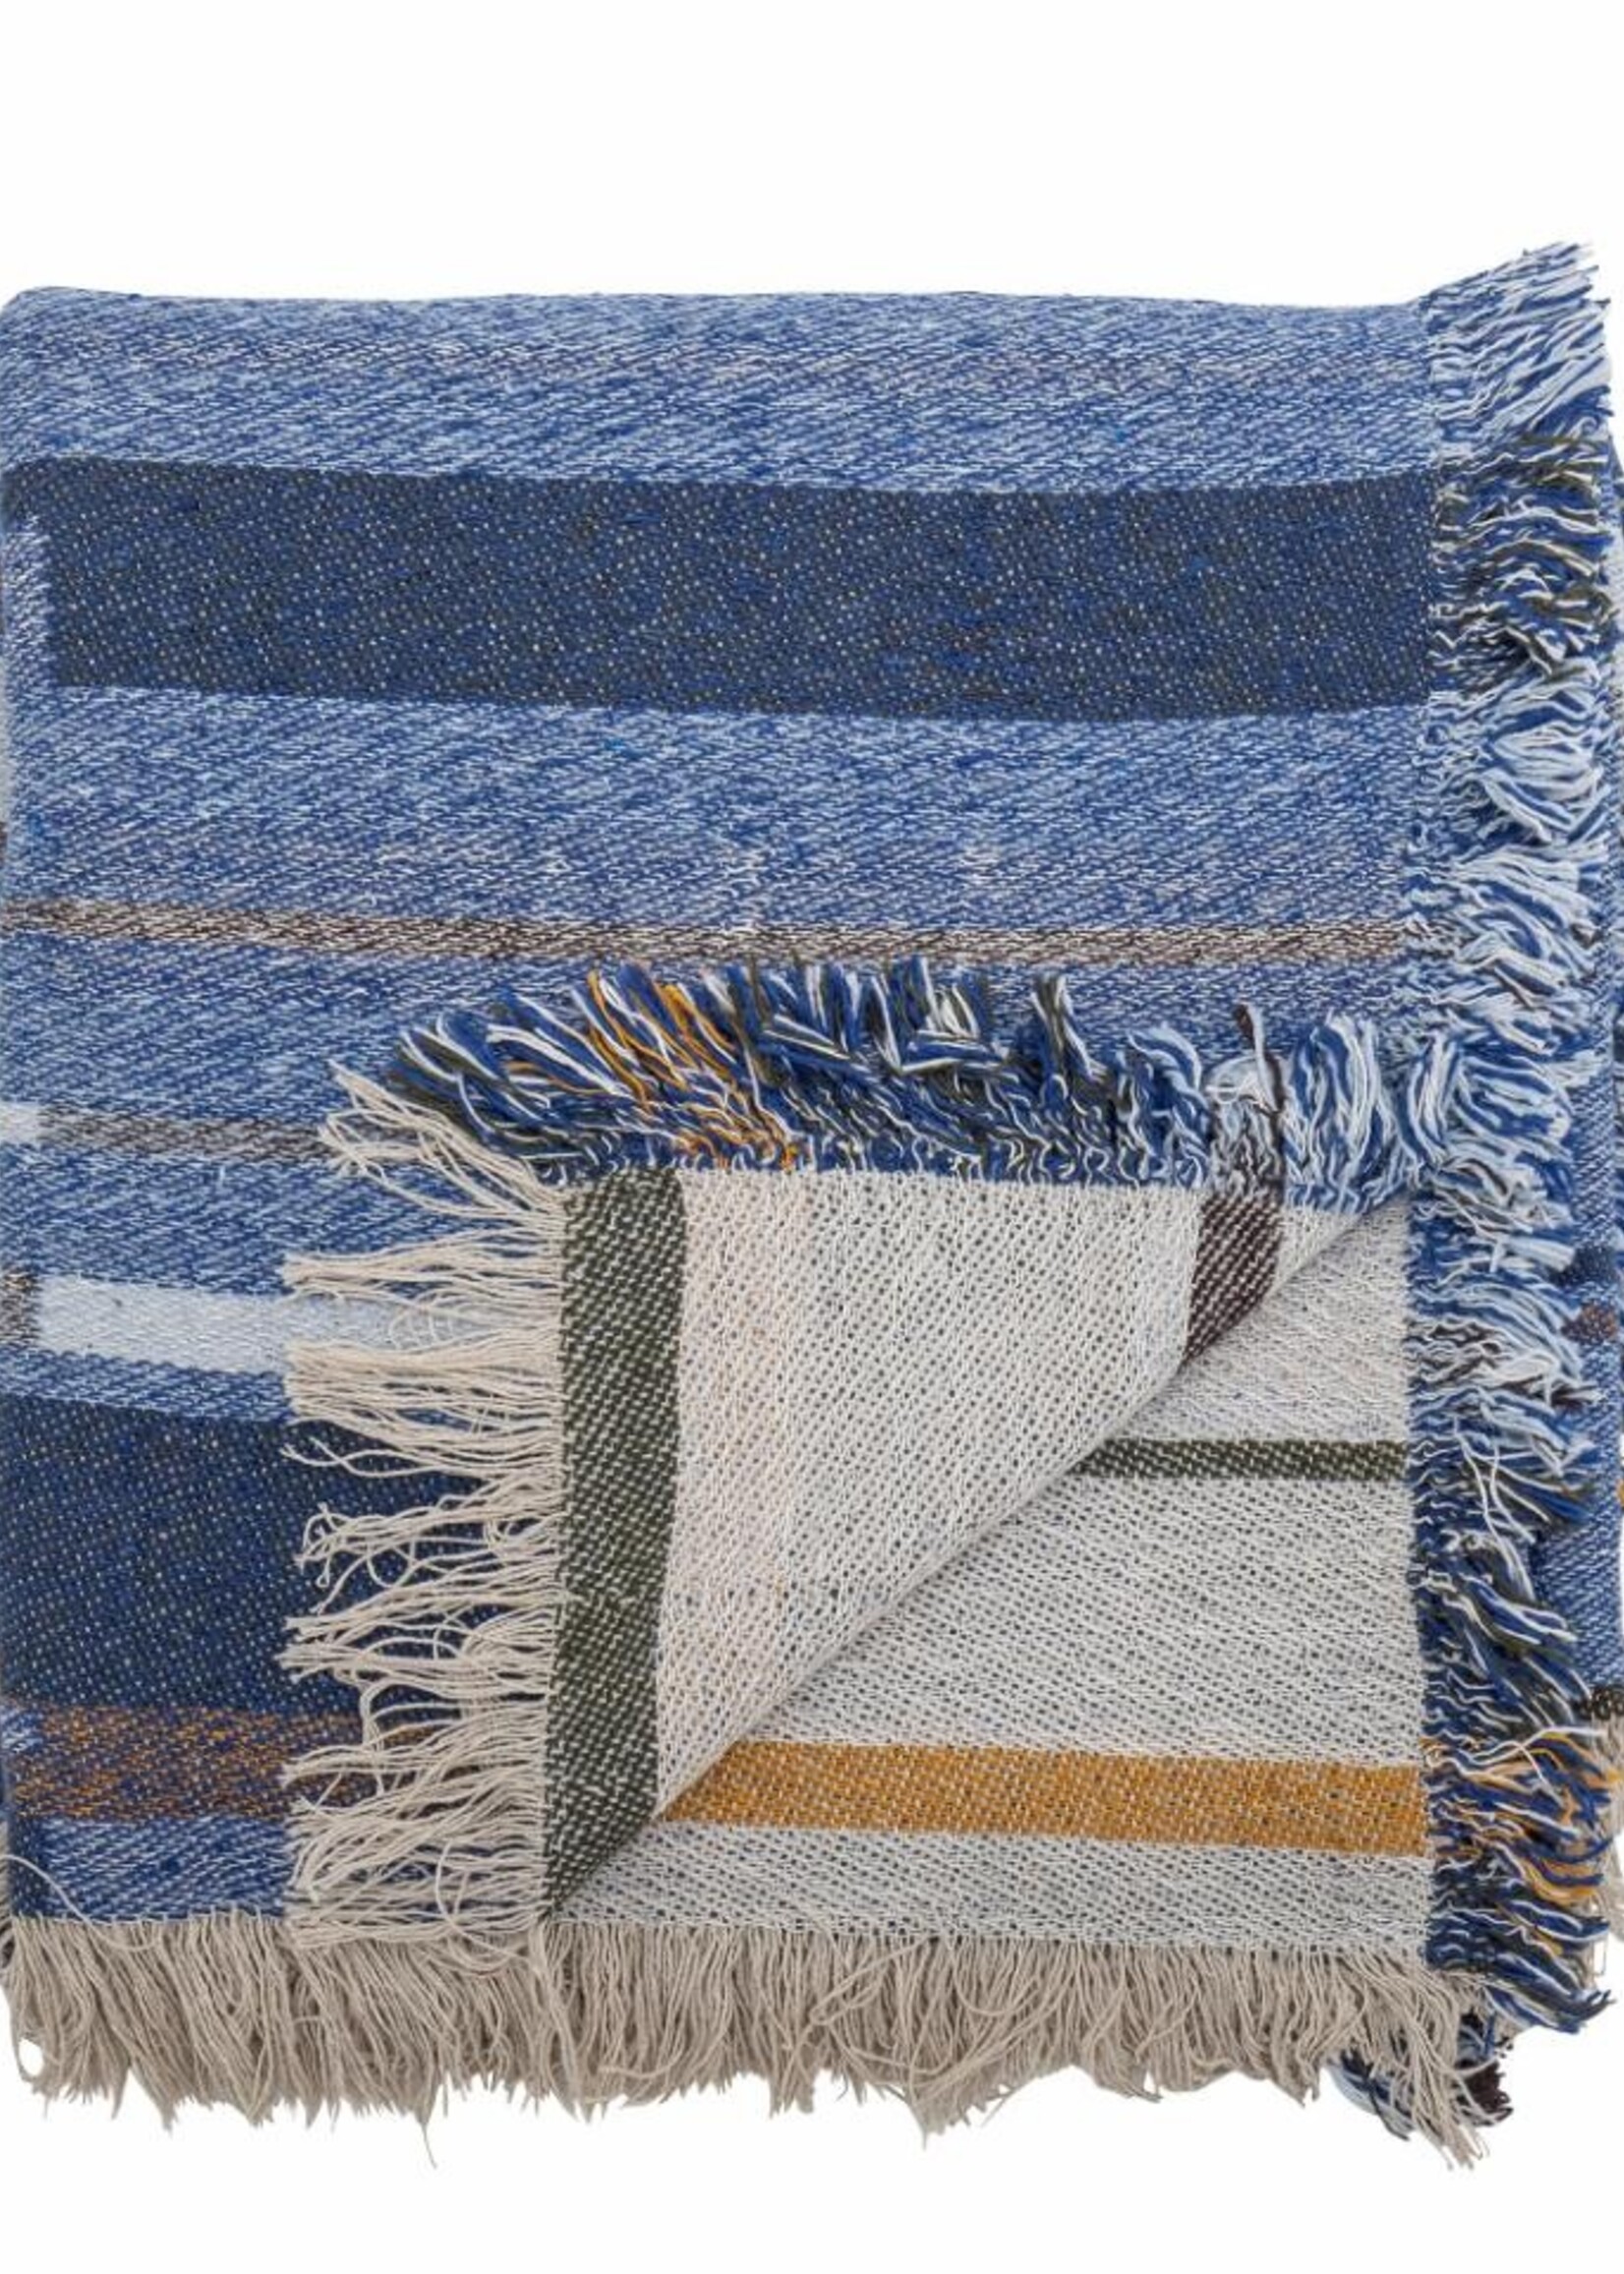 Bloomingville Toscana Throw Blue recycled cotton